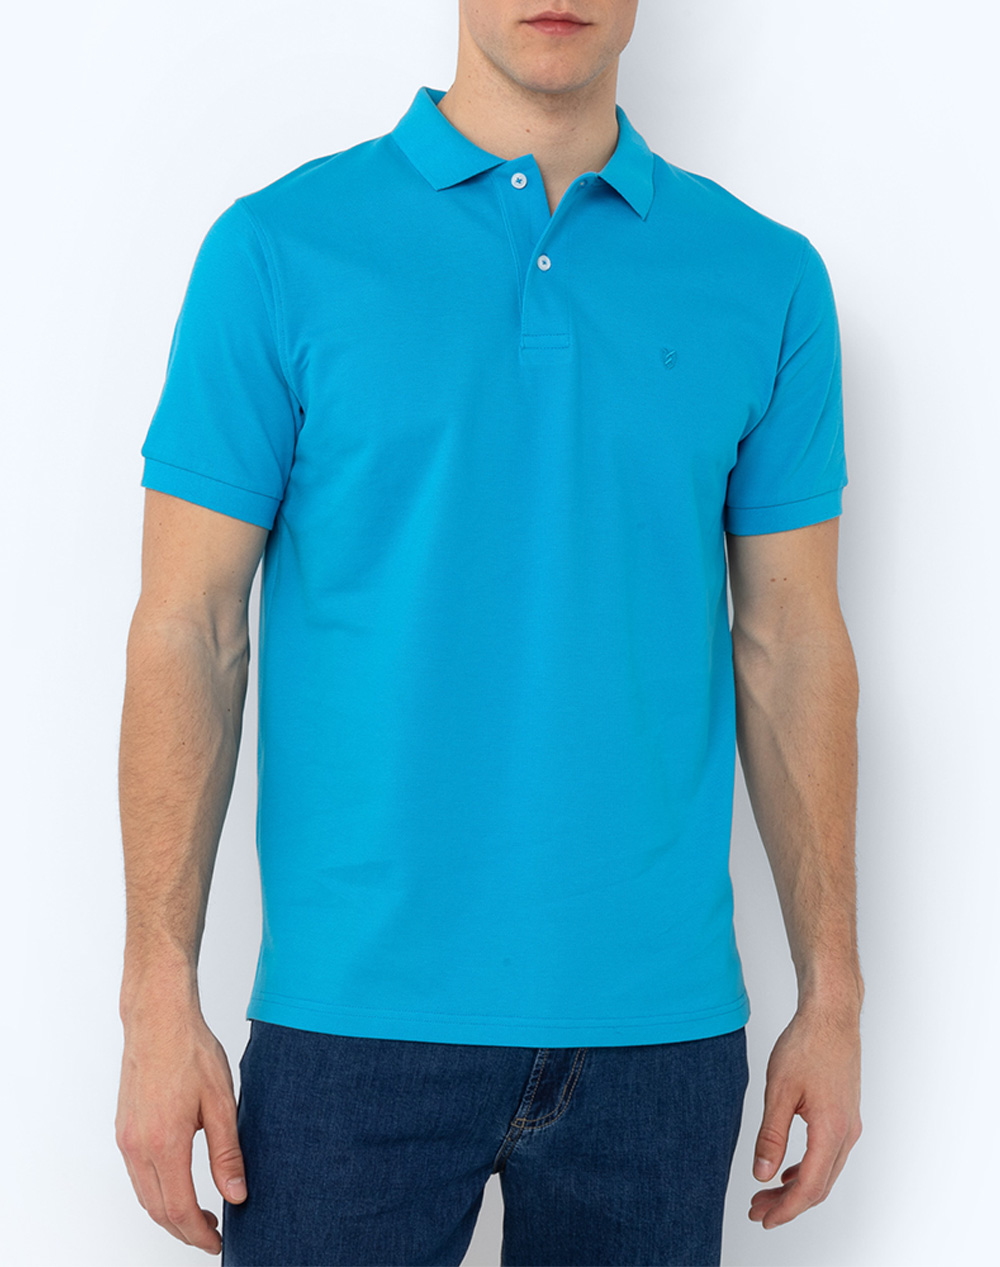 THE BOSTONIANS ΜΠΛΟΥΖΑ POLO PIQUE REGULAR FIT 3PS0001-TURQUOISE SkyBlue